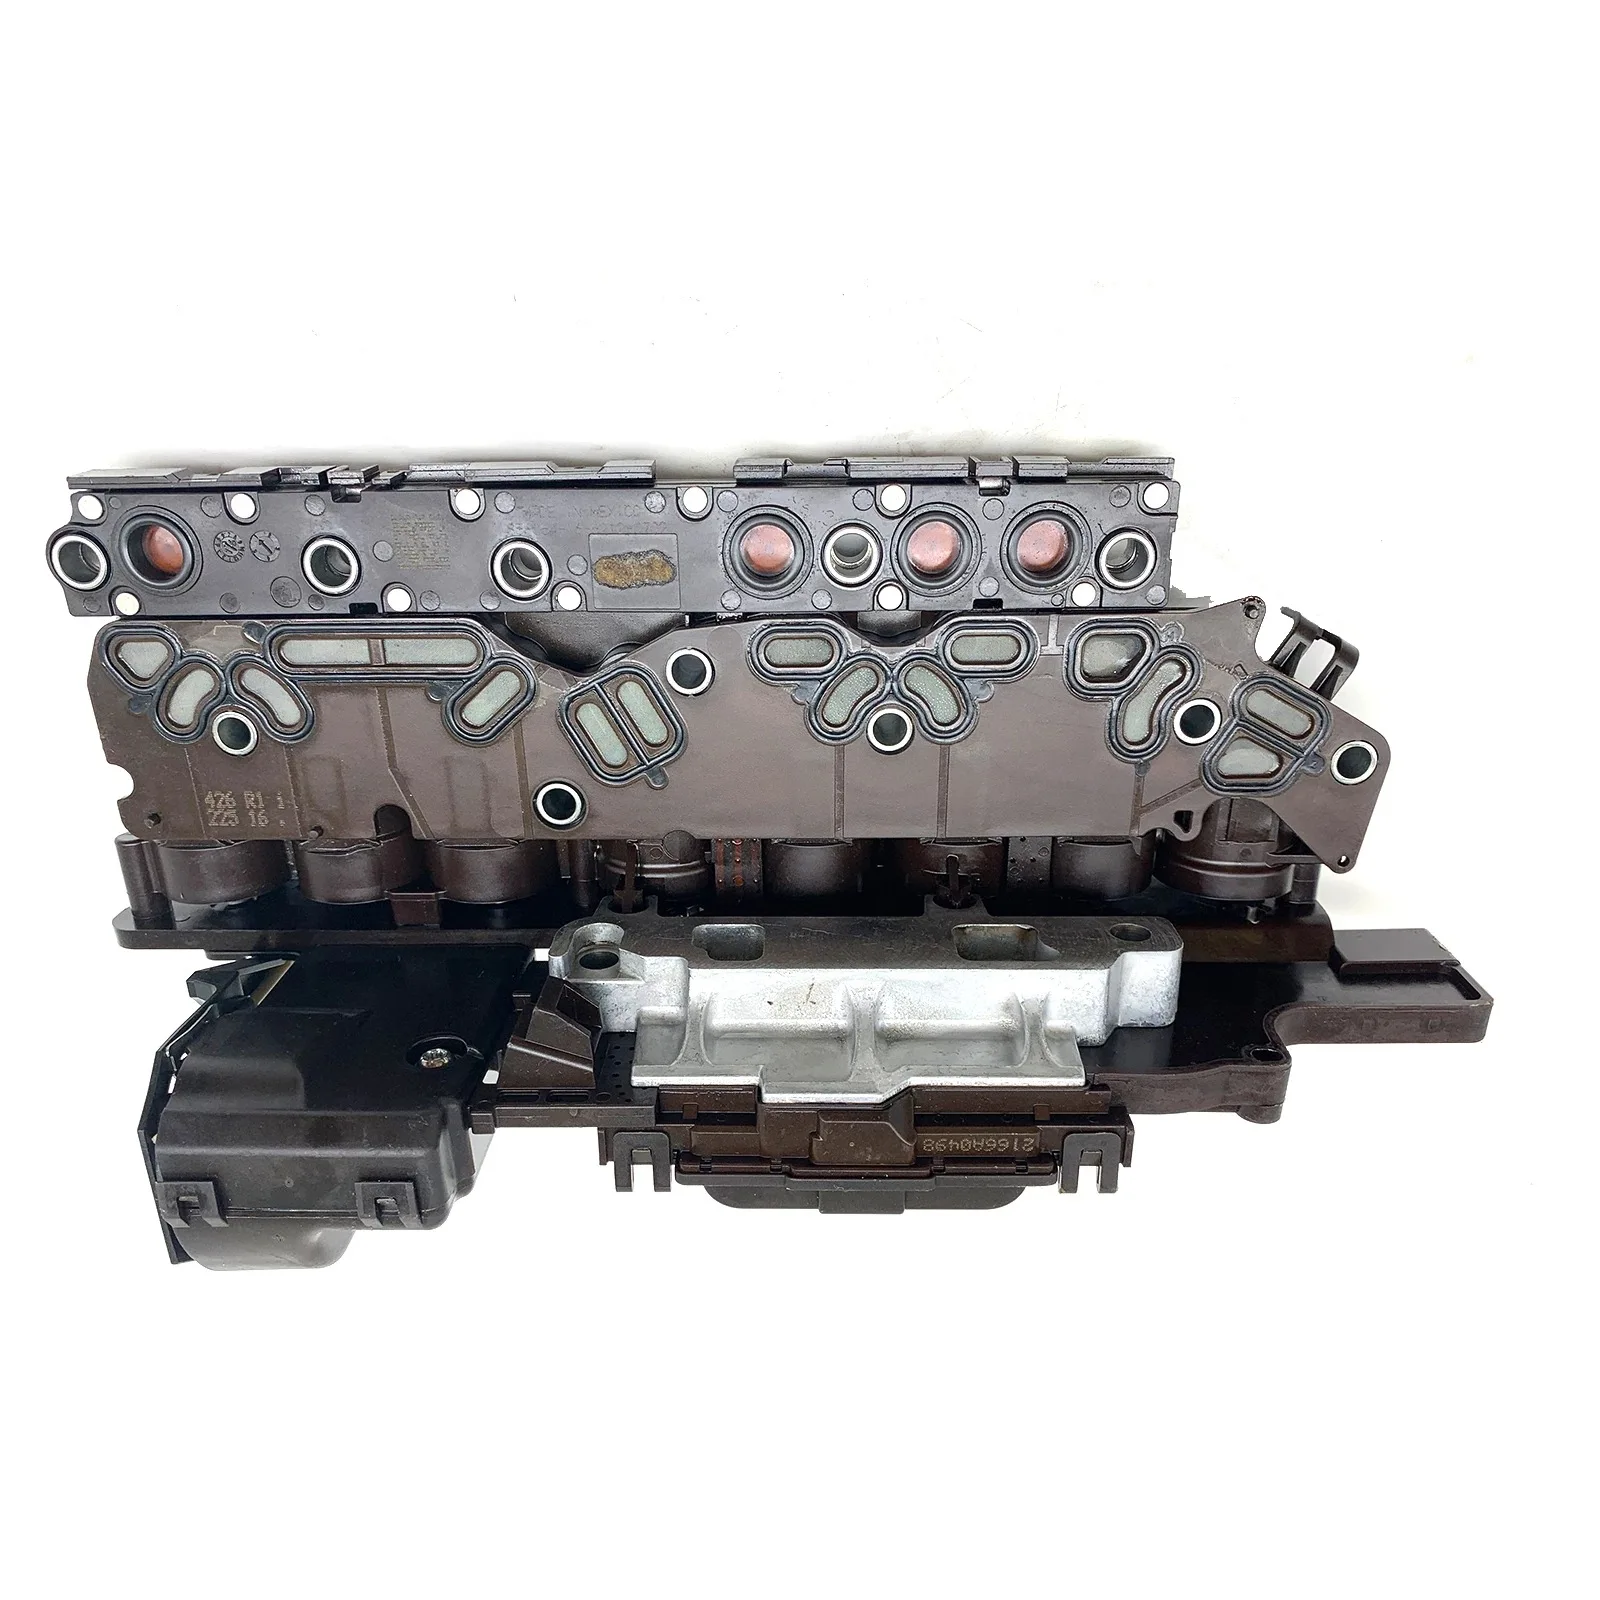 

Transmission Control Module Reliable Transmission Control Unit 24254908 for Car Replacement for Chevrolet Silverado 1500 Series